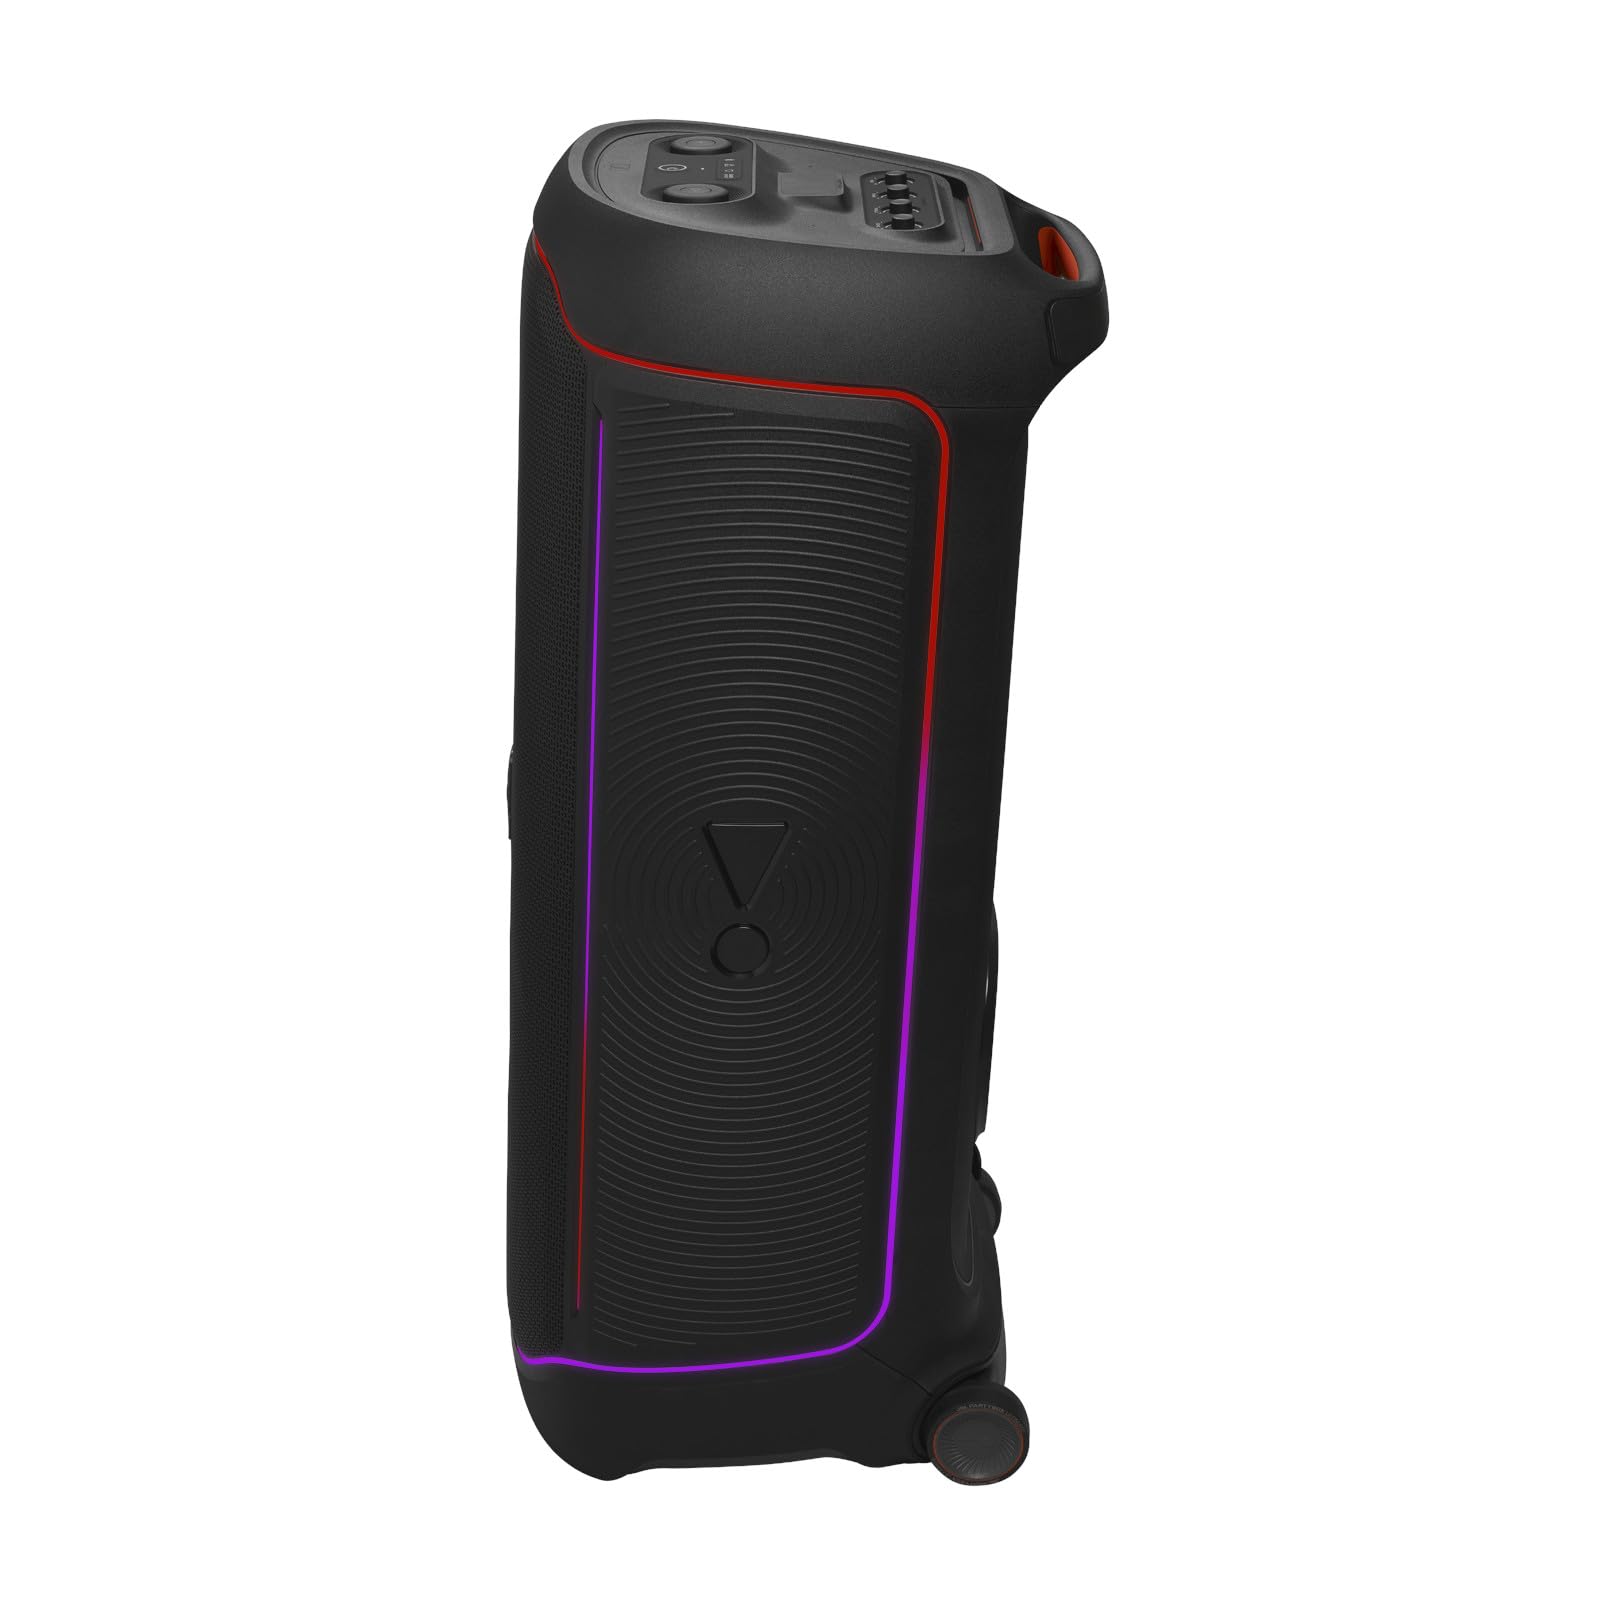 JBL Partybox Ultimate - Multi Purpose Party Speaker, with Wi-fi & Bluetooth Connectivity, Lightshow, IPx4 Slashproof, Dual Mic & Guitar Inputs, Handle & Sturdy Wheels